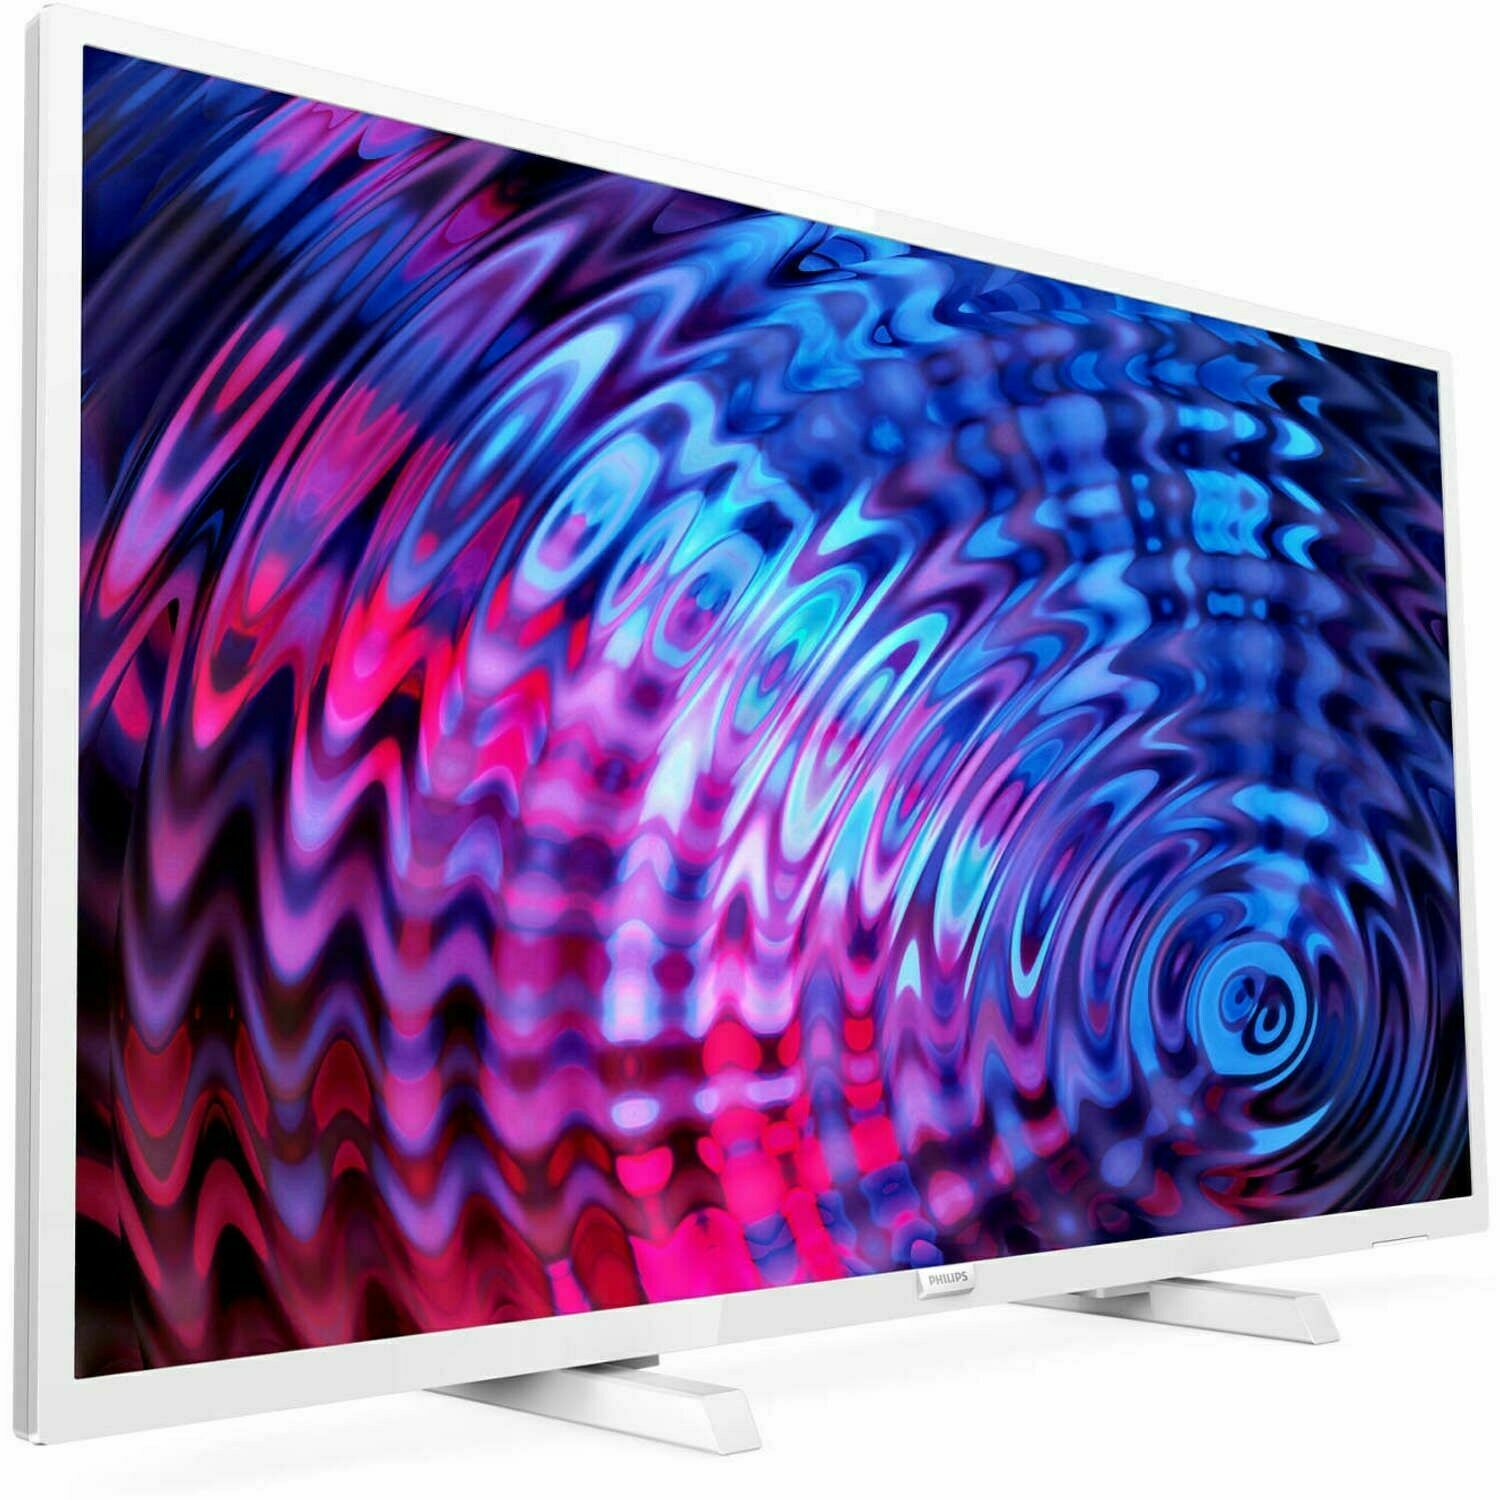 Refurbished Philips 32 Inch 32PFT5603 Full HD LED (1920 x 1080) Television (NS)